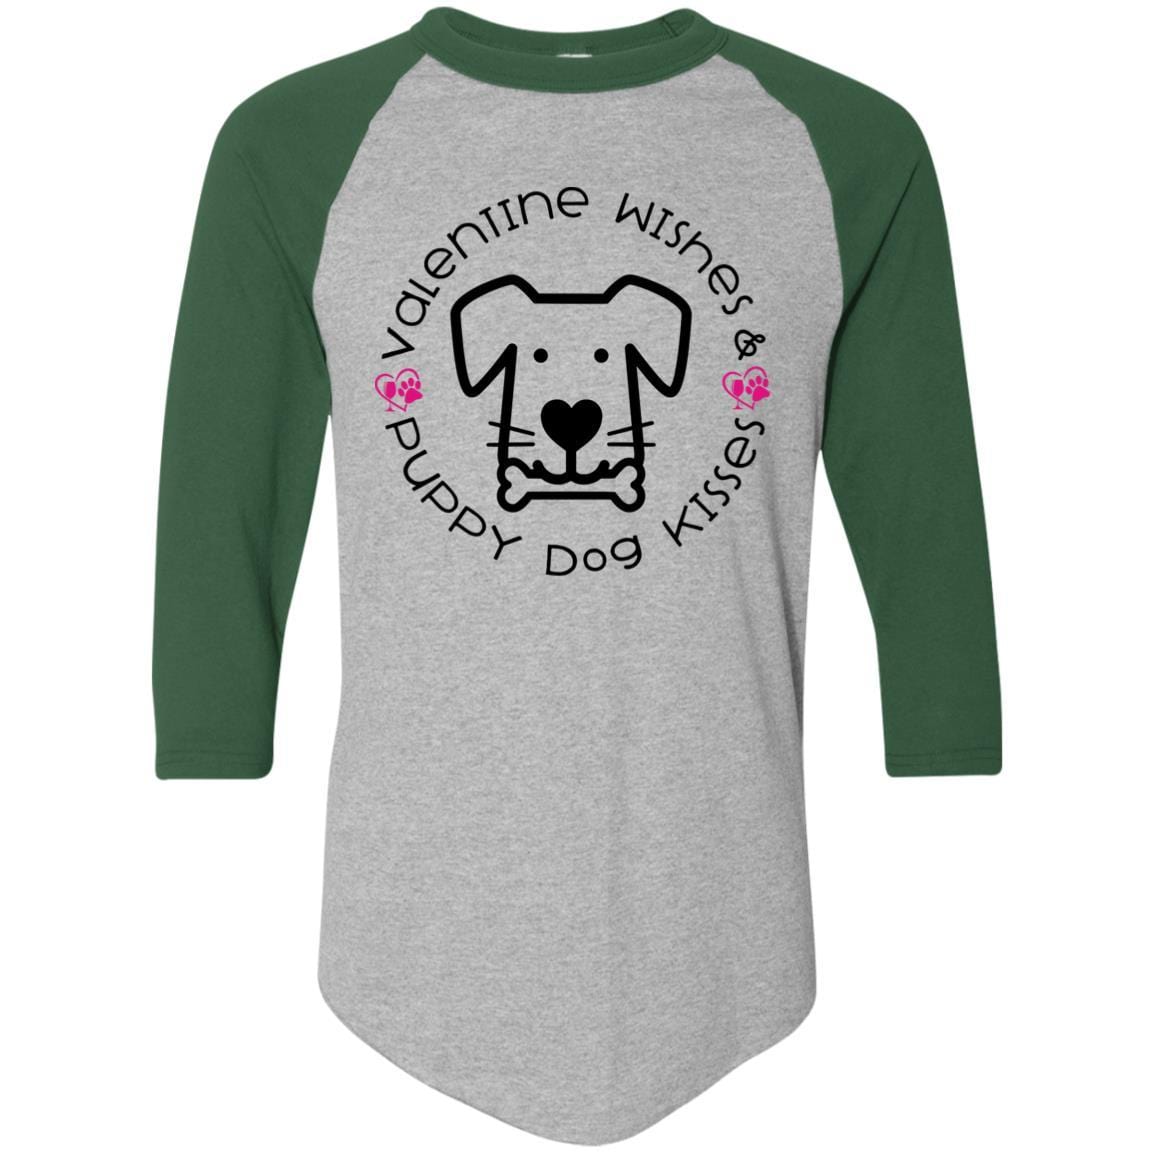 T-Shirts Athletic Heather/Dark Green / S Winey Bitches Co 'Valentine Wishes and Puppy Dog Kisses" (Dog) Colorblock Raglan Jersey WineyBitchesCo